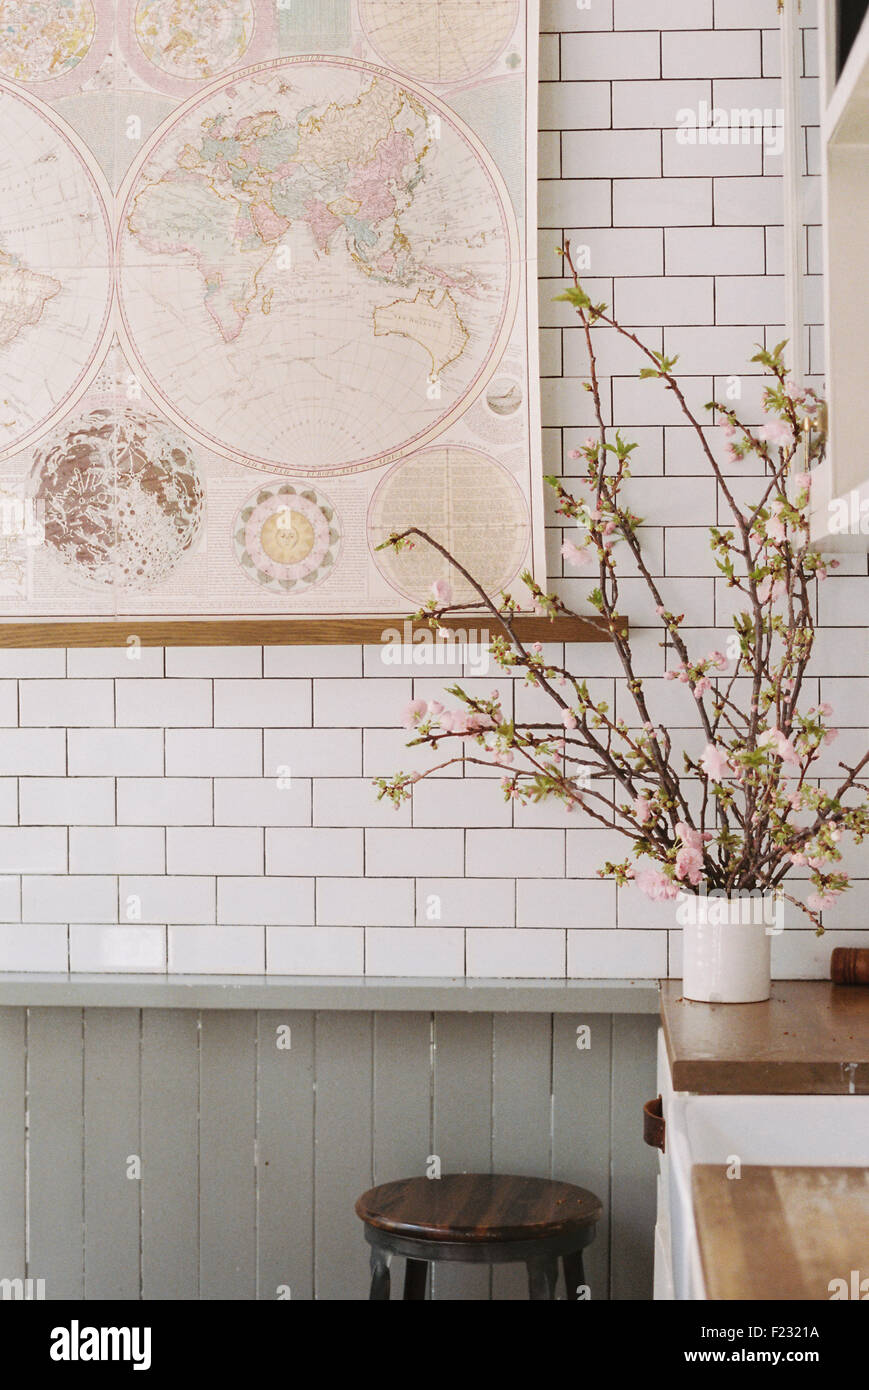 A kitchen worksurface, vase of flowers and a tiled wall. Stock Photo